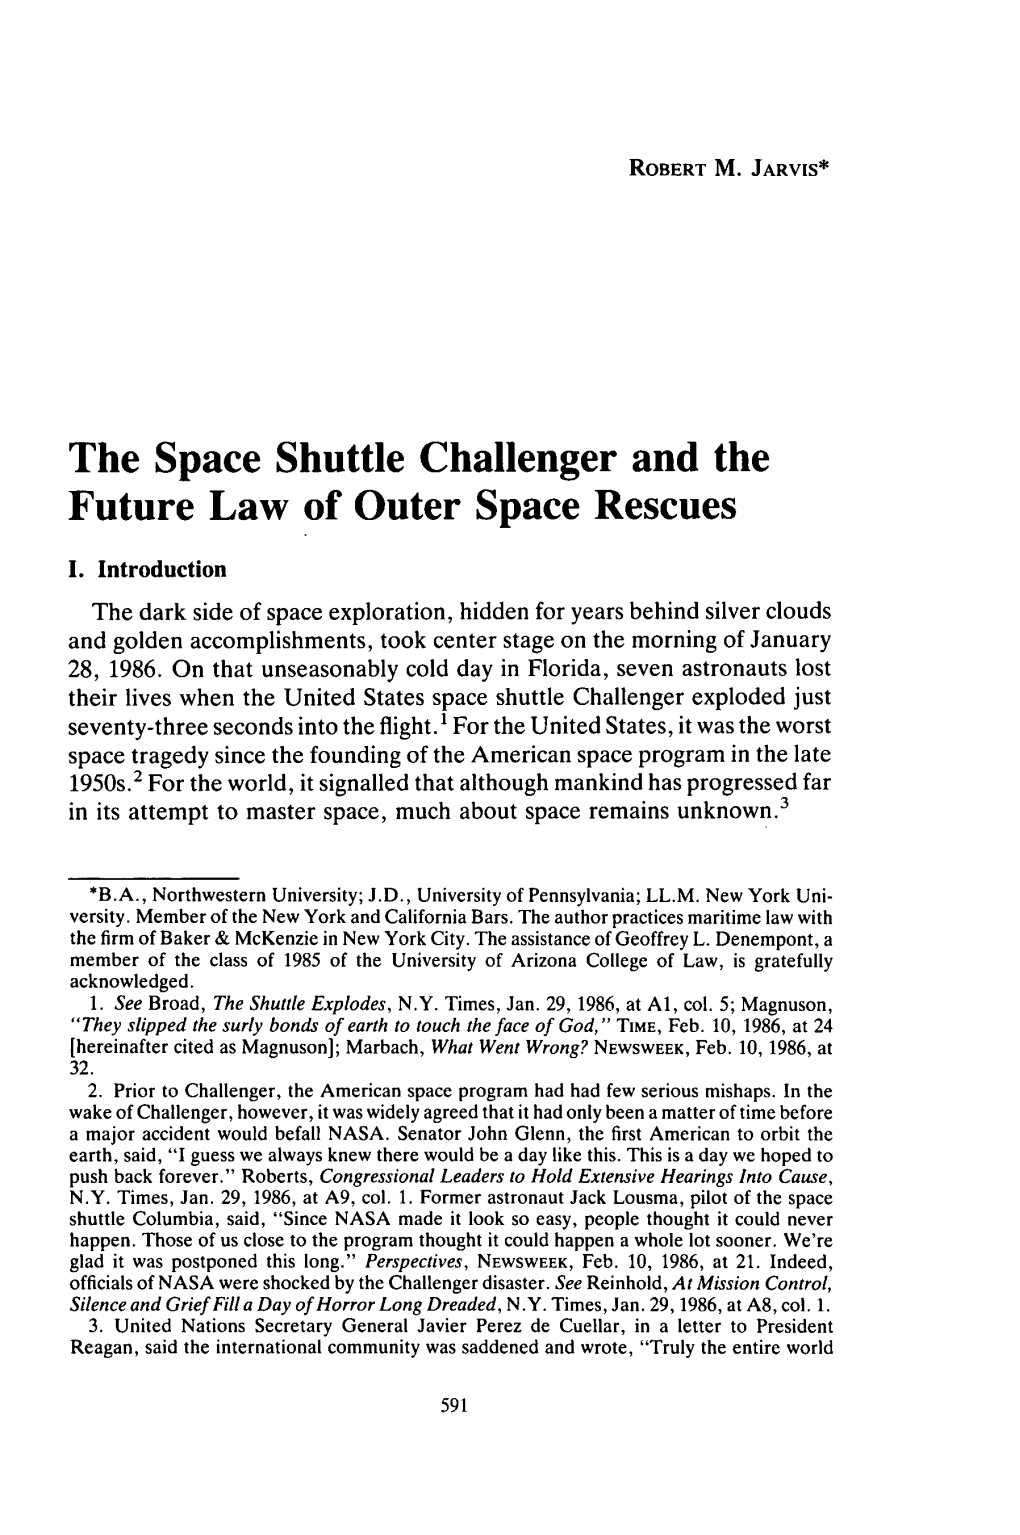 The Space Shuttle Challenger and the Future Law of Outer Space Rescues